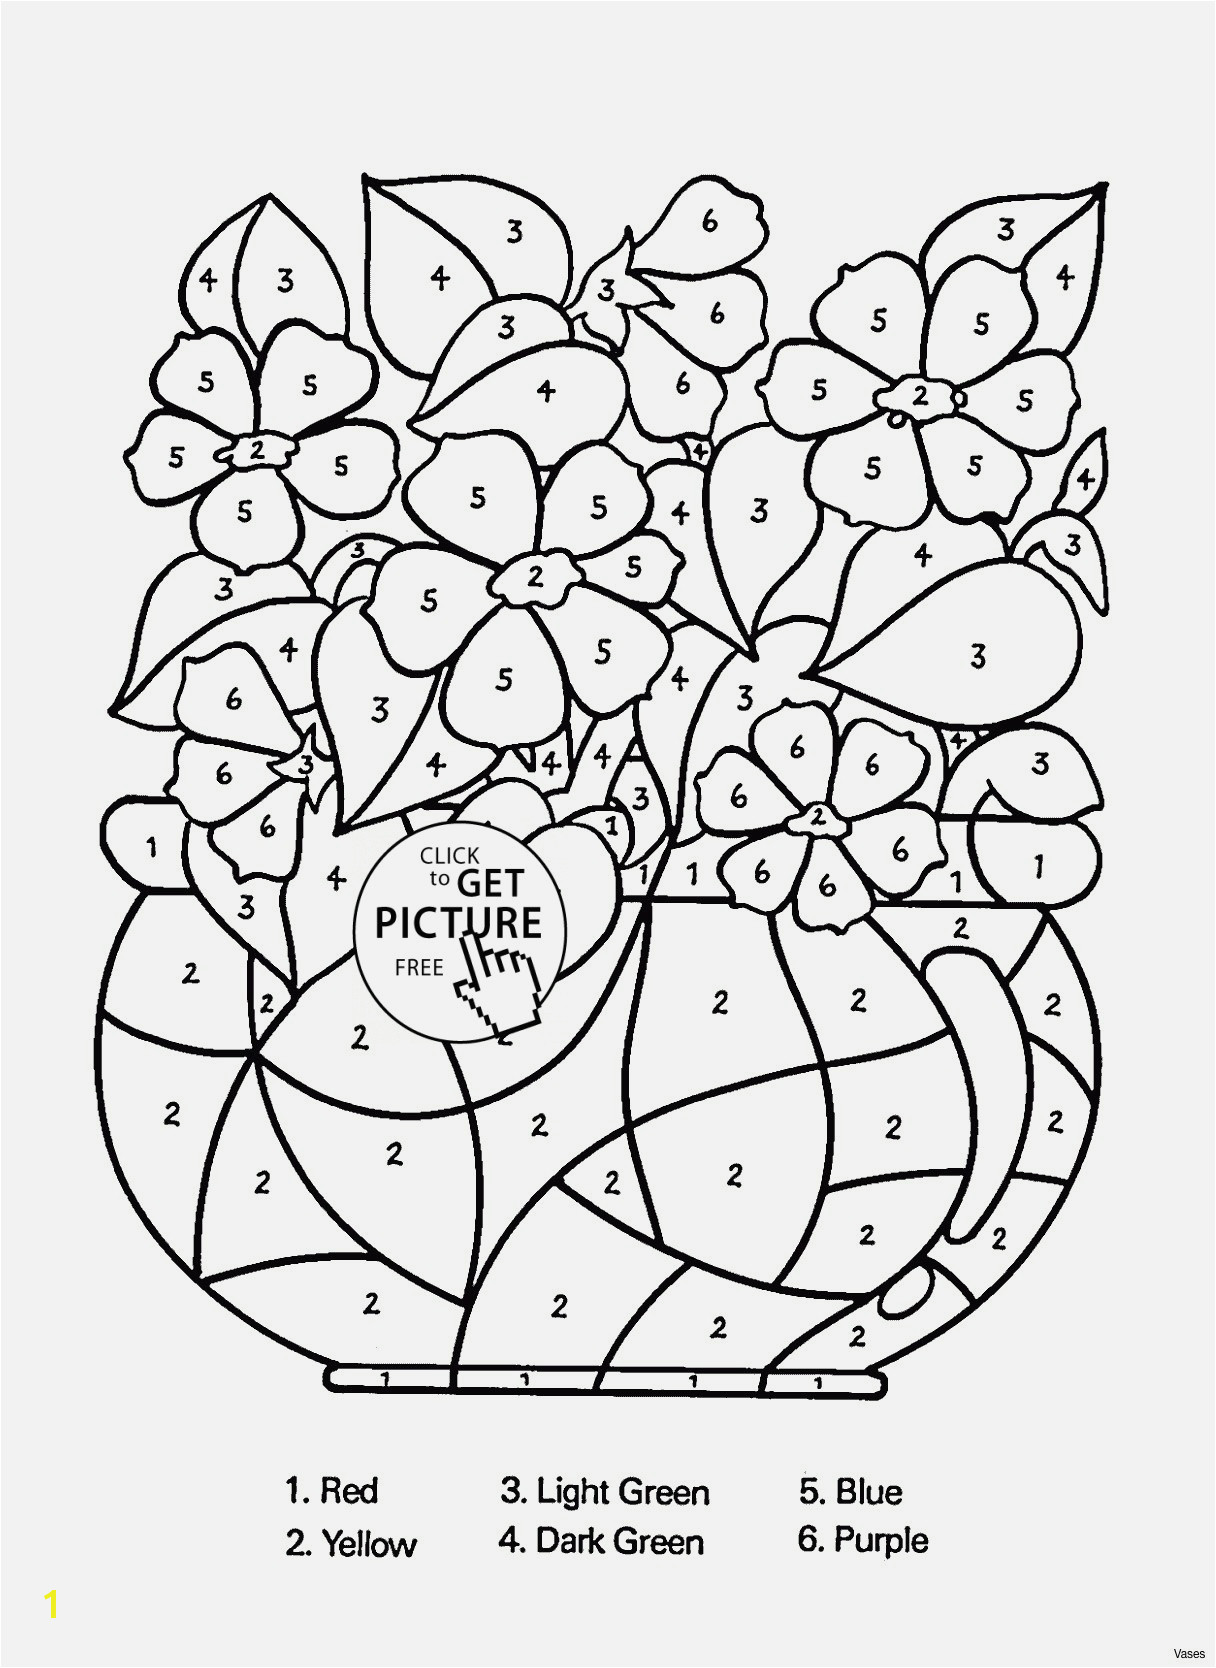 Medium Level Coloring Pages Free Trolls Coloring Pages the First Ever Custom Free Coloring Best